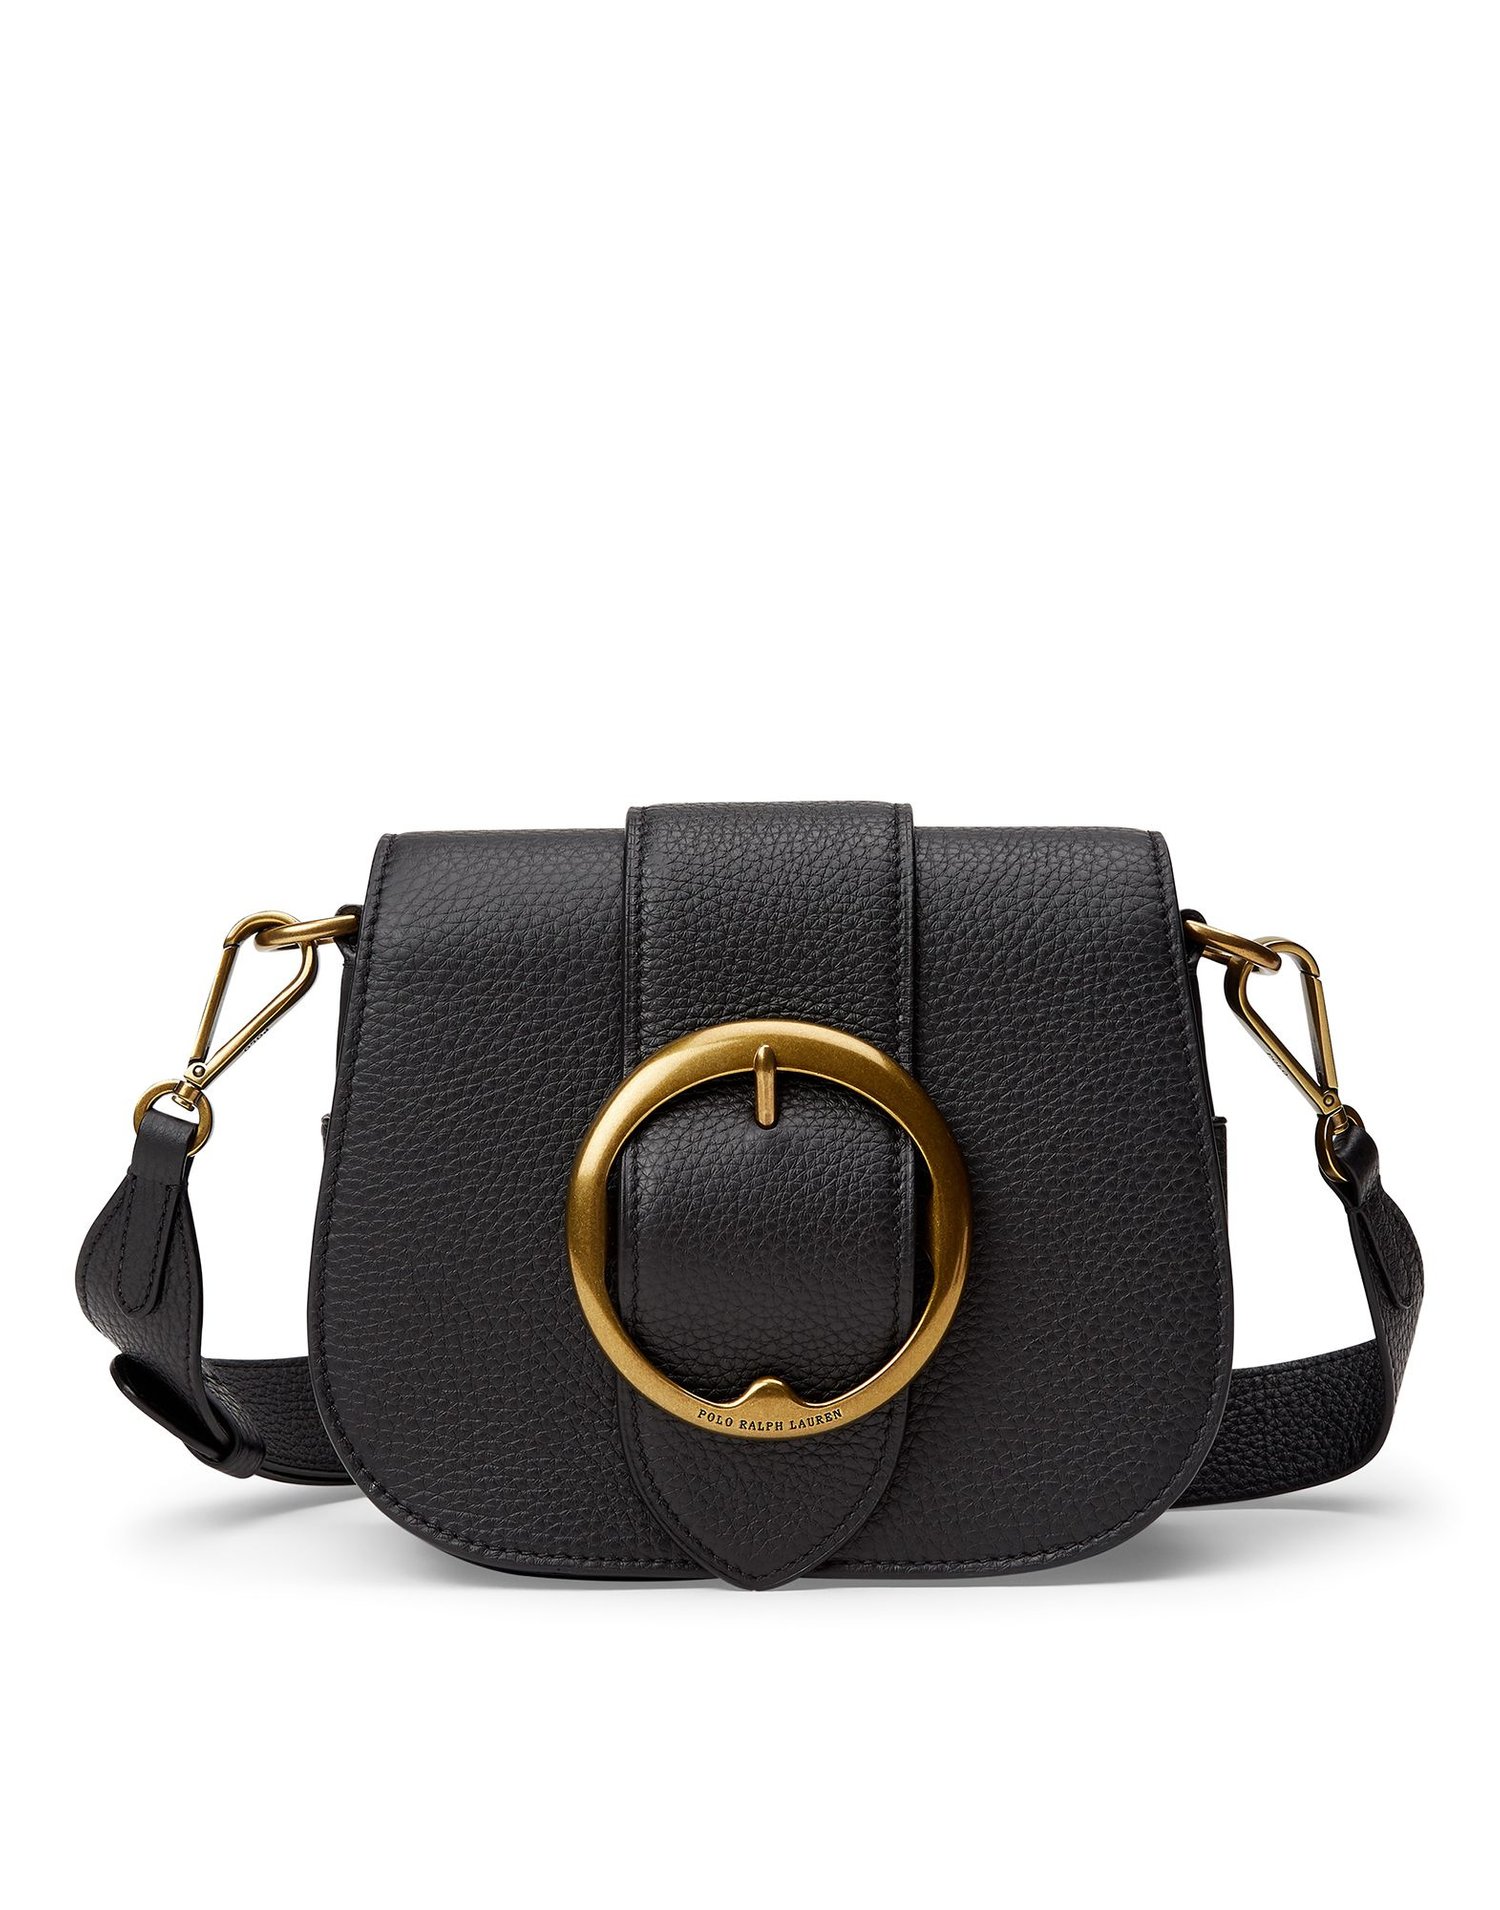 Polo Ralph Lauren Lennox Bag in Black Pebbled Leather — UFO No More